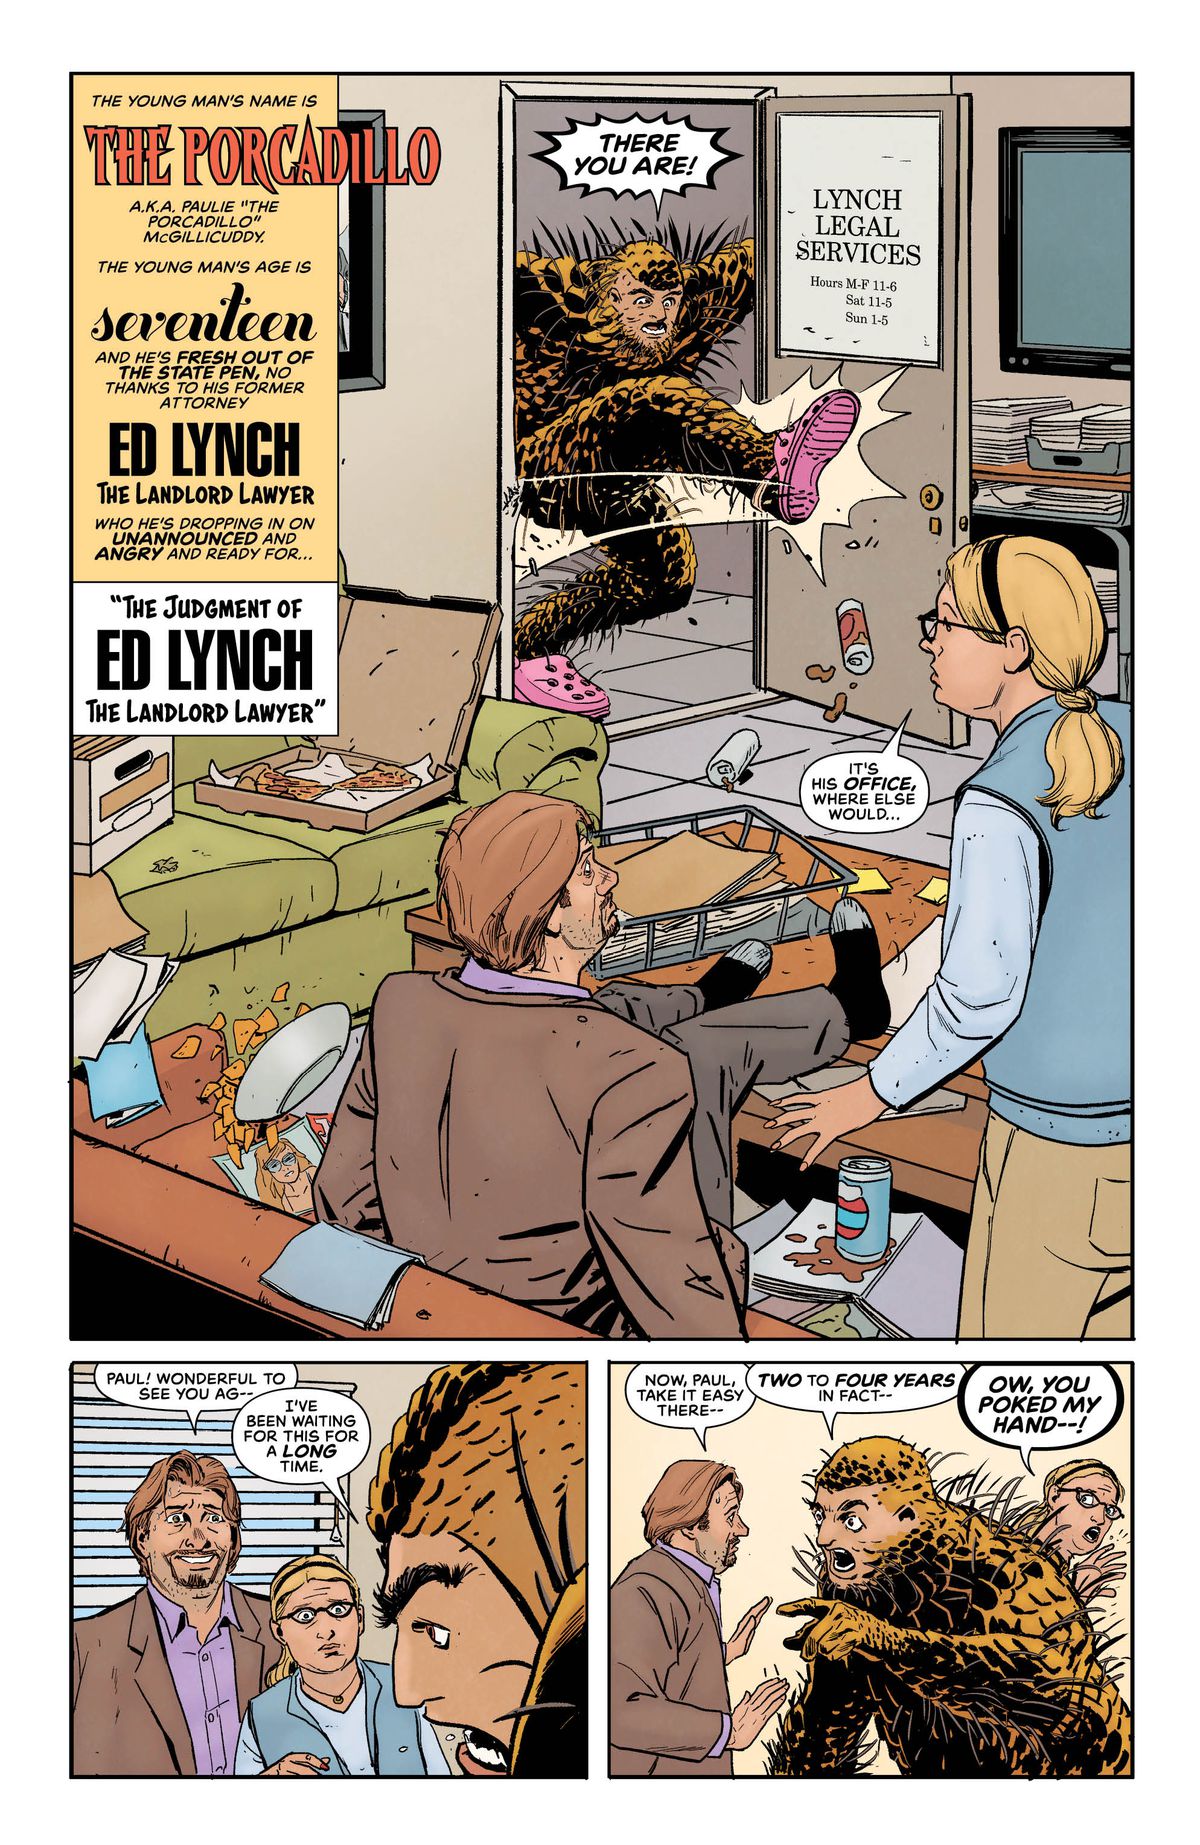 A preview page from Superman’s Pal Jimmy Olsen #3, DC Comics (2019), featuring the Porcadillo, who seems to be a man-porcupine-and-possibly-armadillo hybrid. 